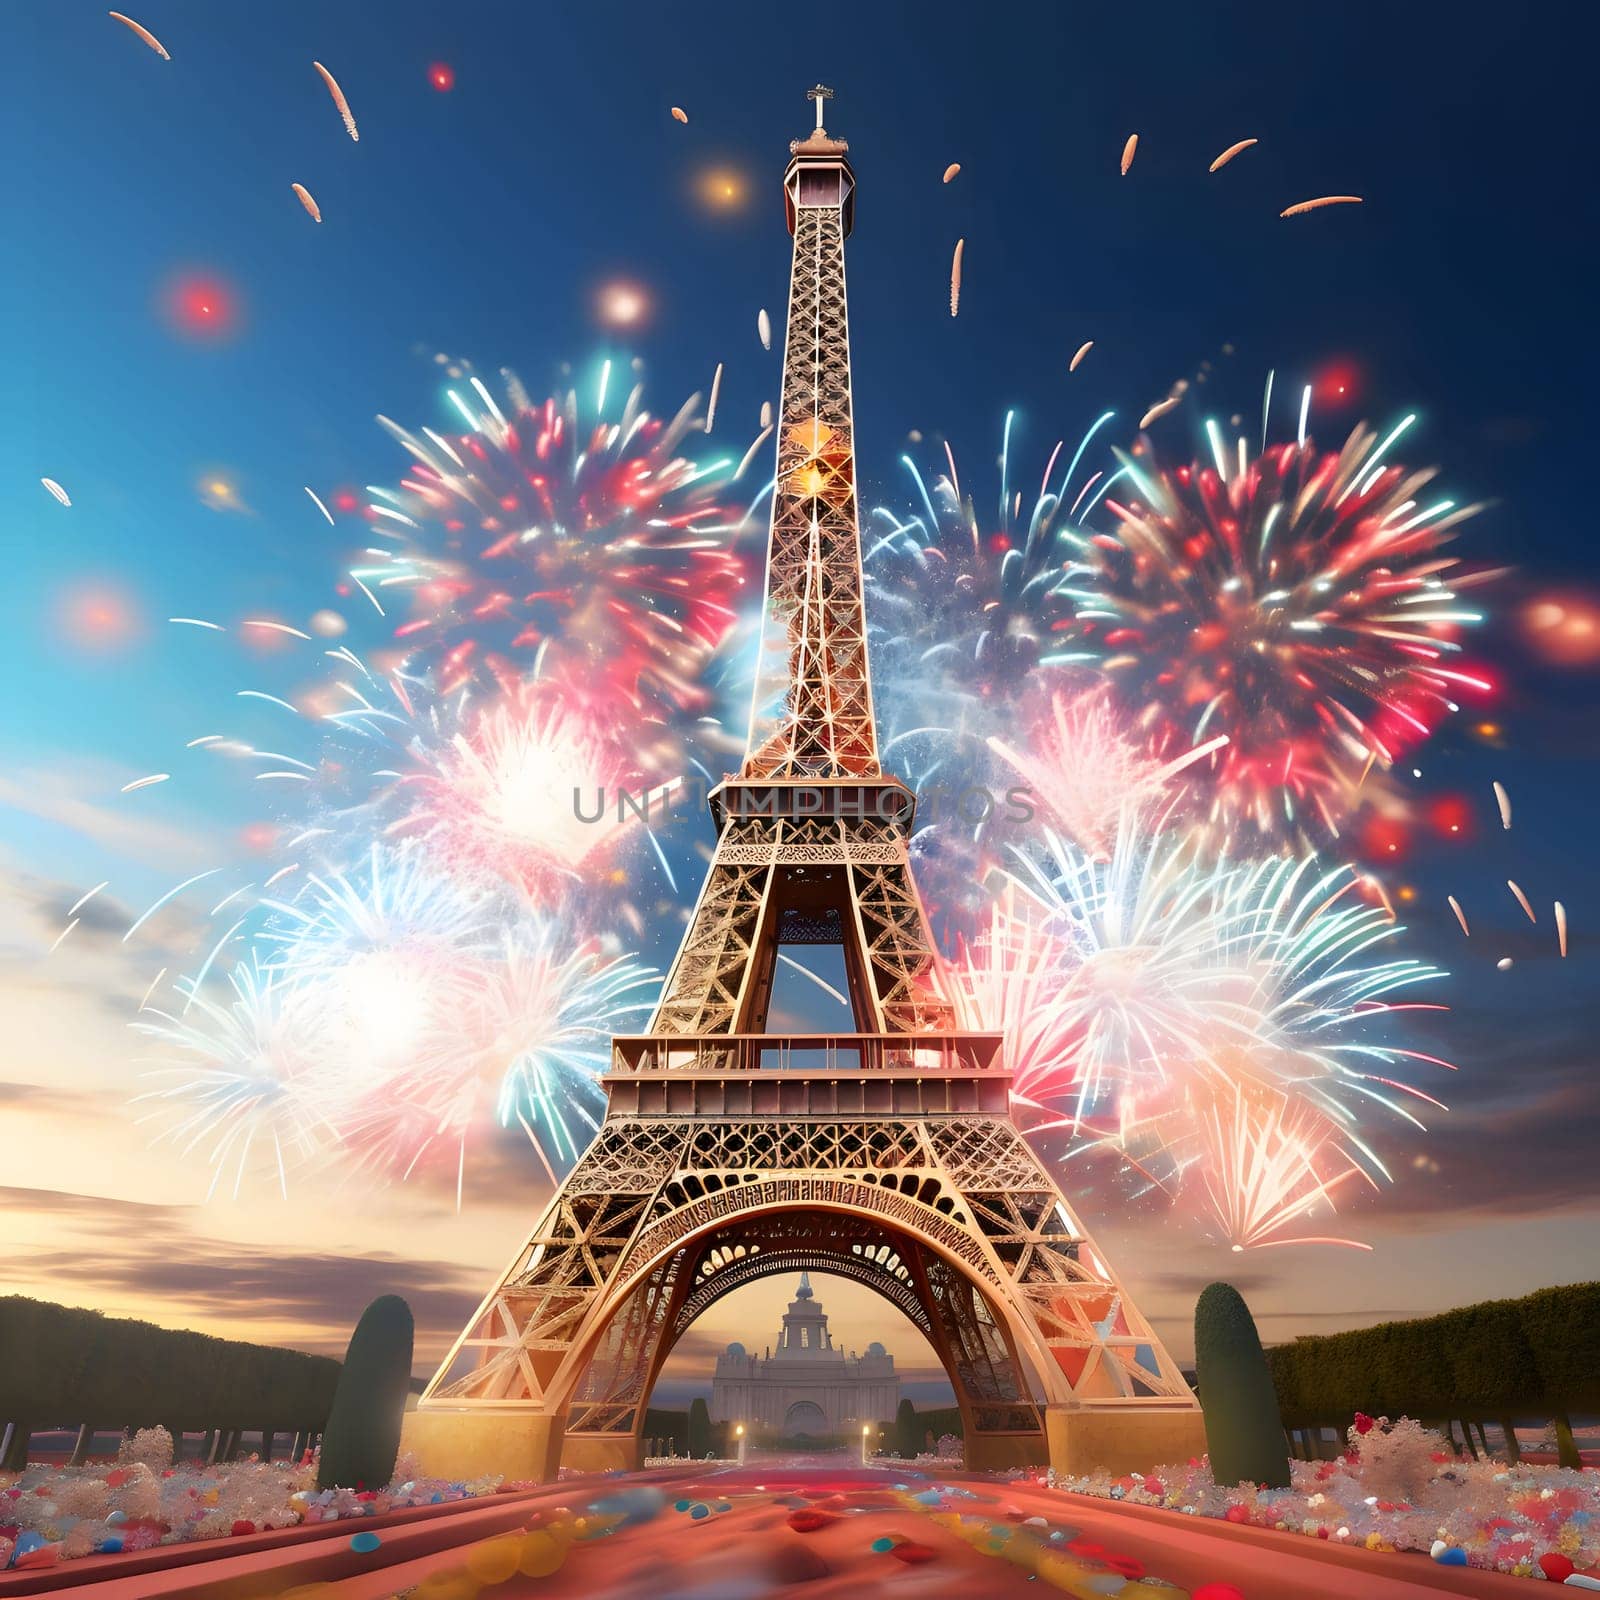 Illustration, explosions, fireworks over eiffel tower. New Year's fun and festivities. by ThemesS